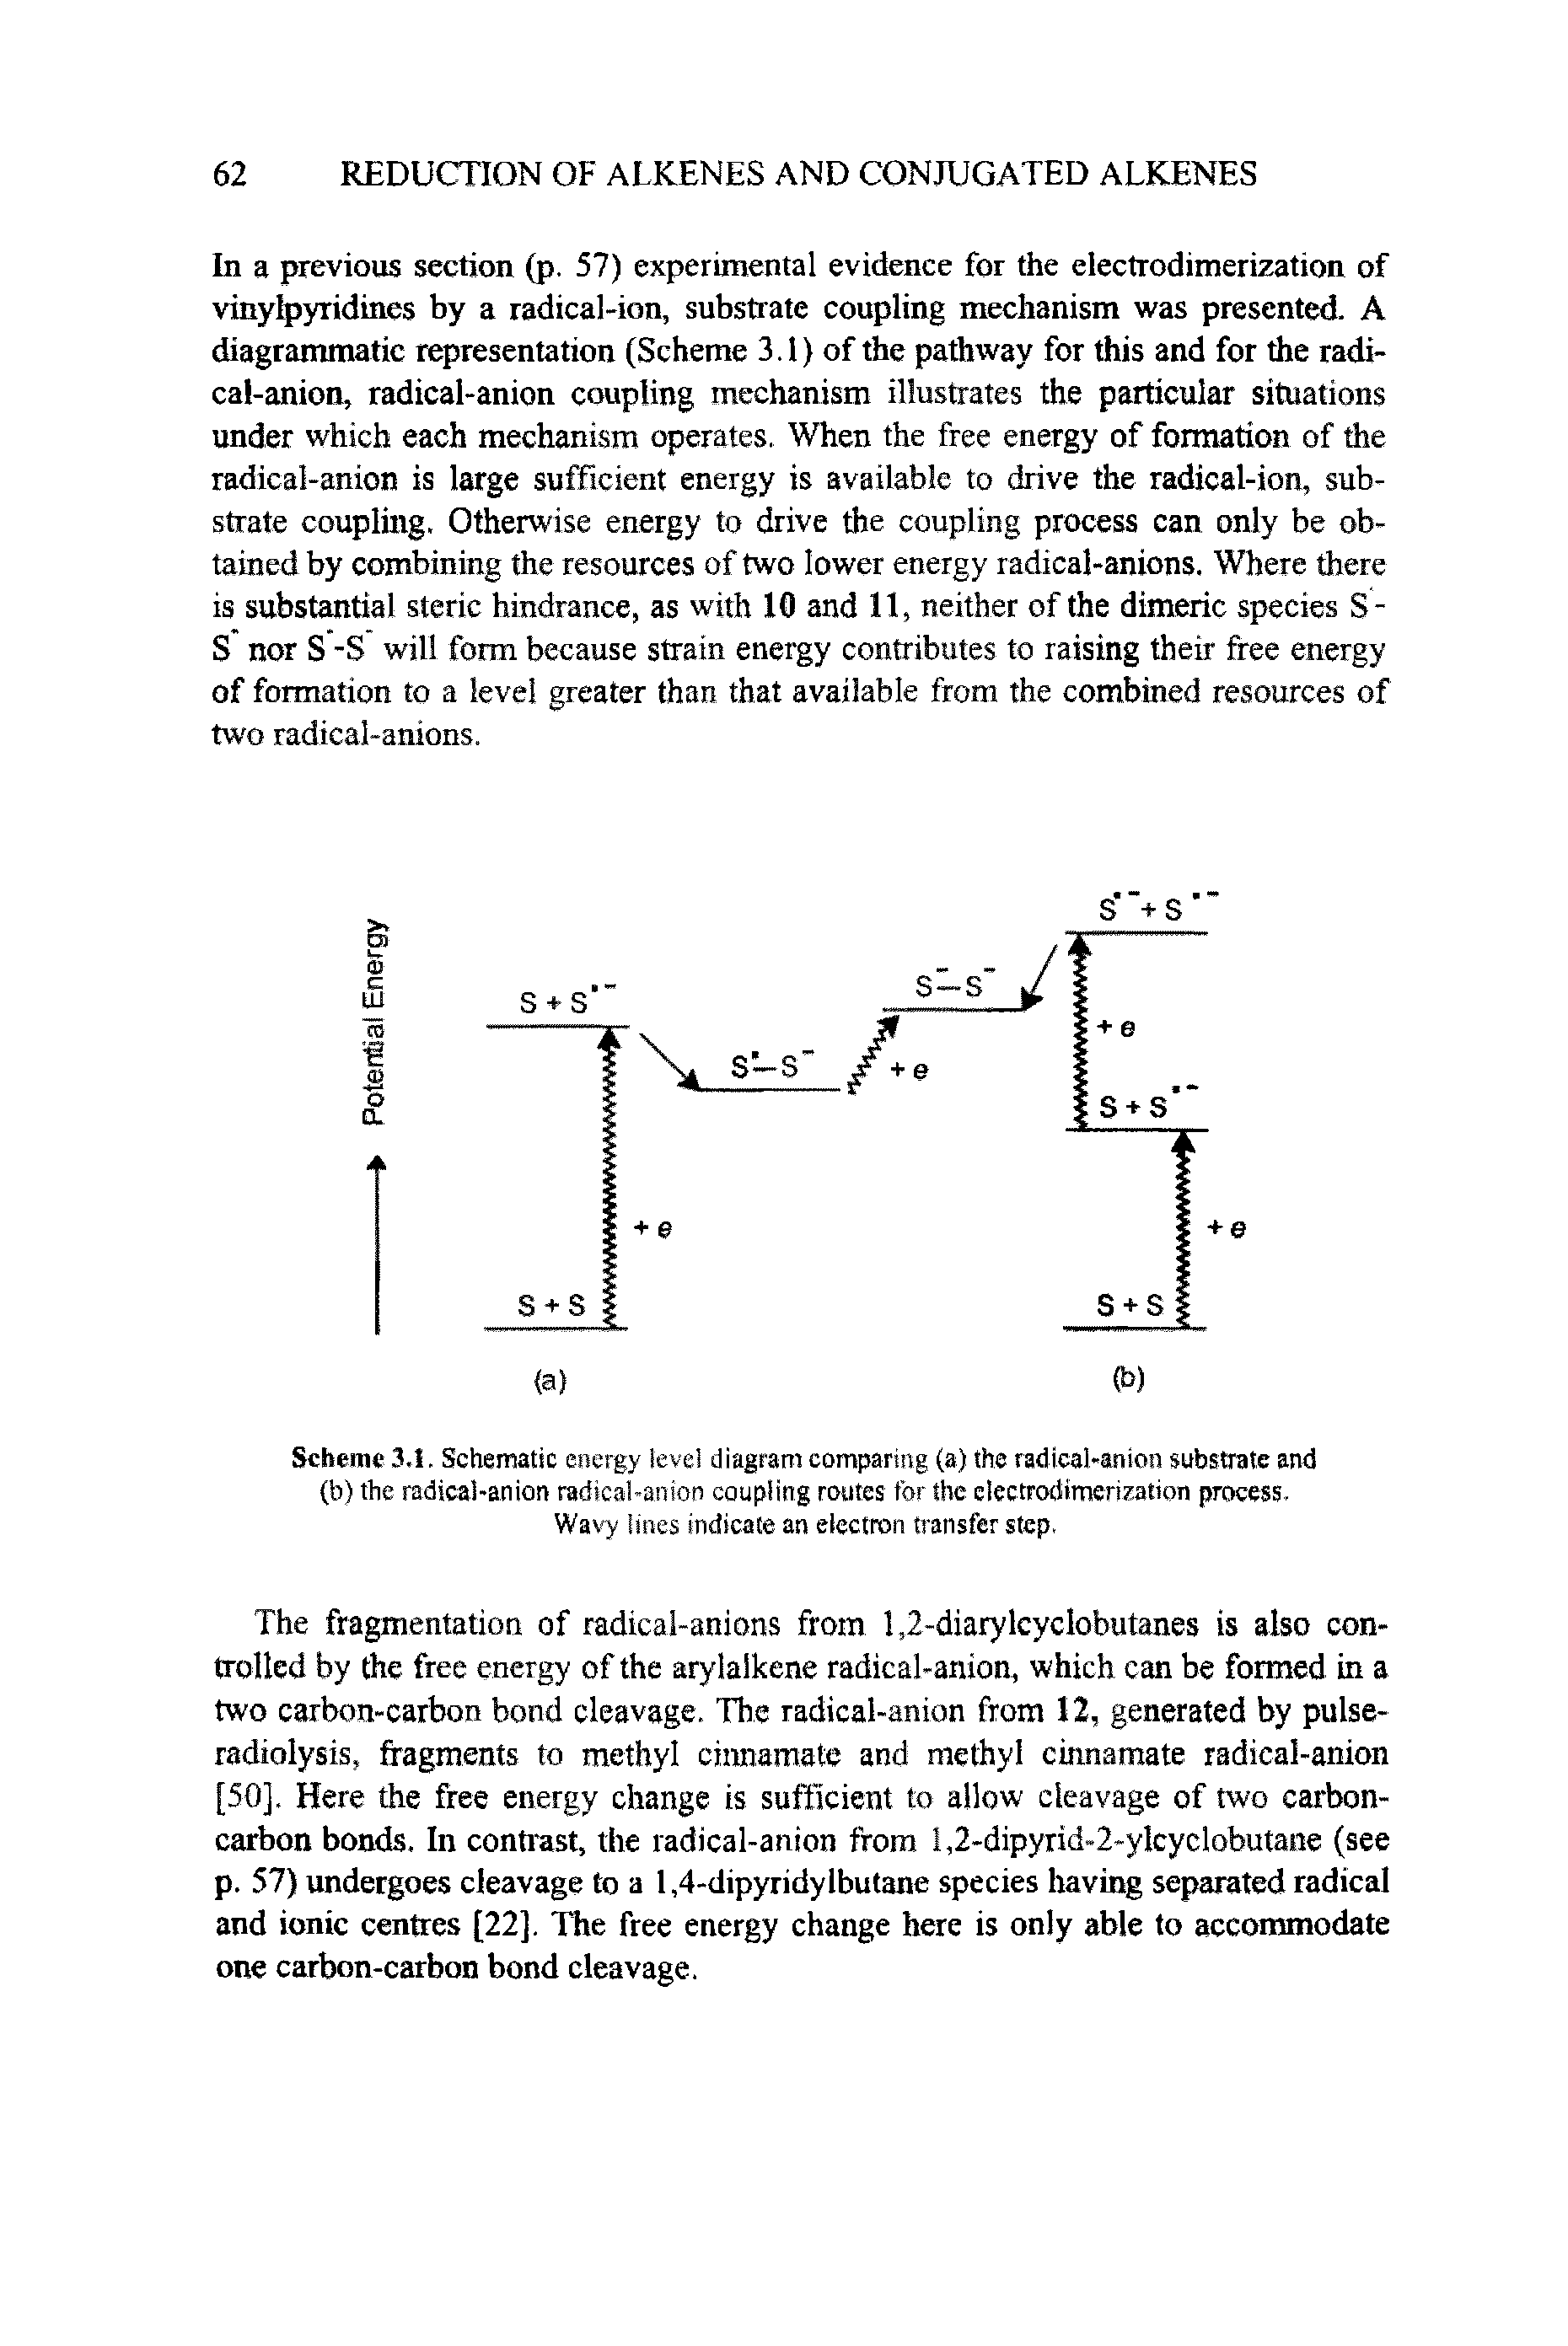 Scheme 3.1. Schematic energy level diagram comparing (a) the radical-anion substrate and (b) the radical-anion radical-anion coupling routes for the clcctrodimerization process. Wavy lines indicate an electron transfer step.